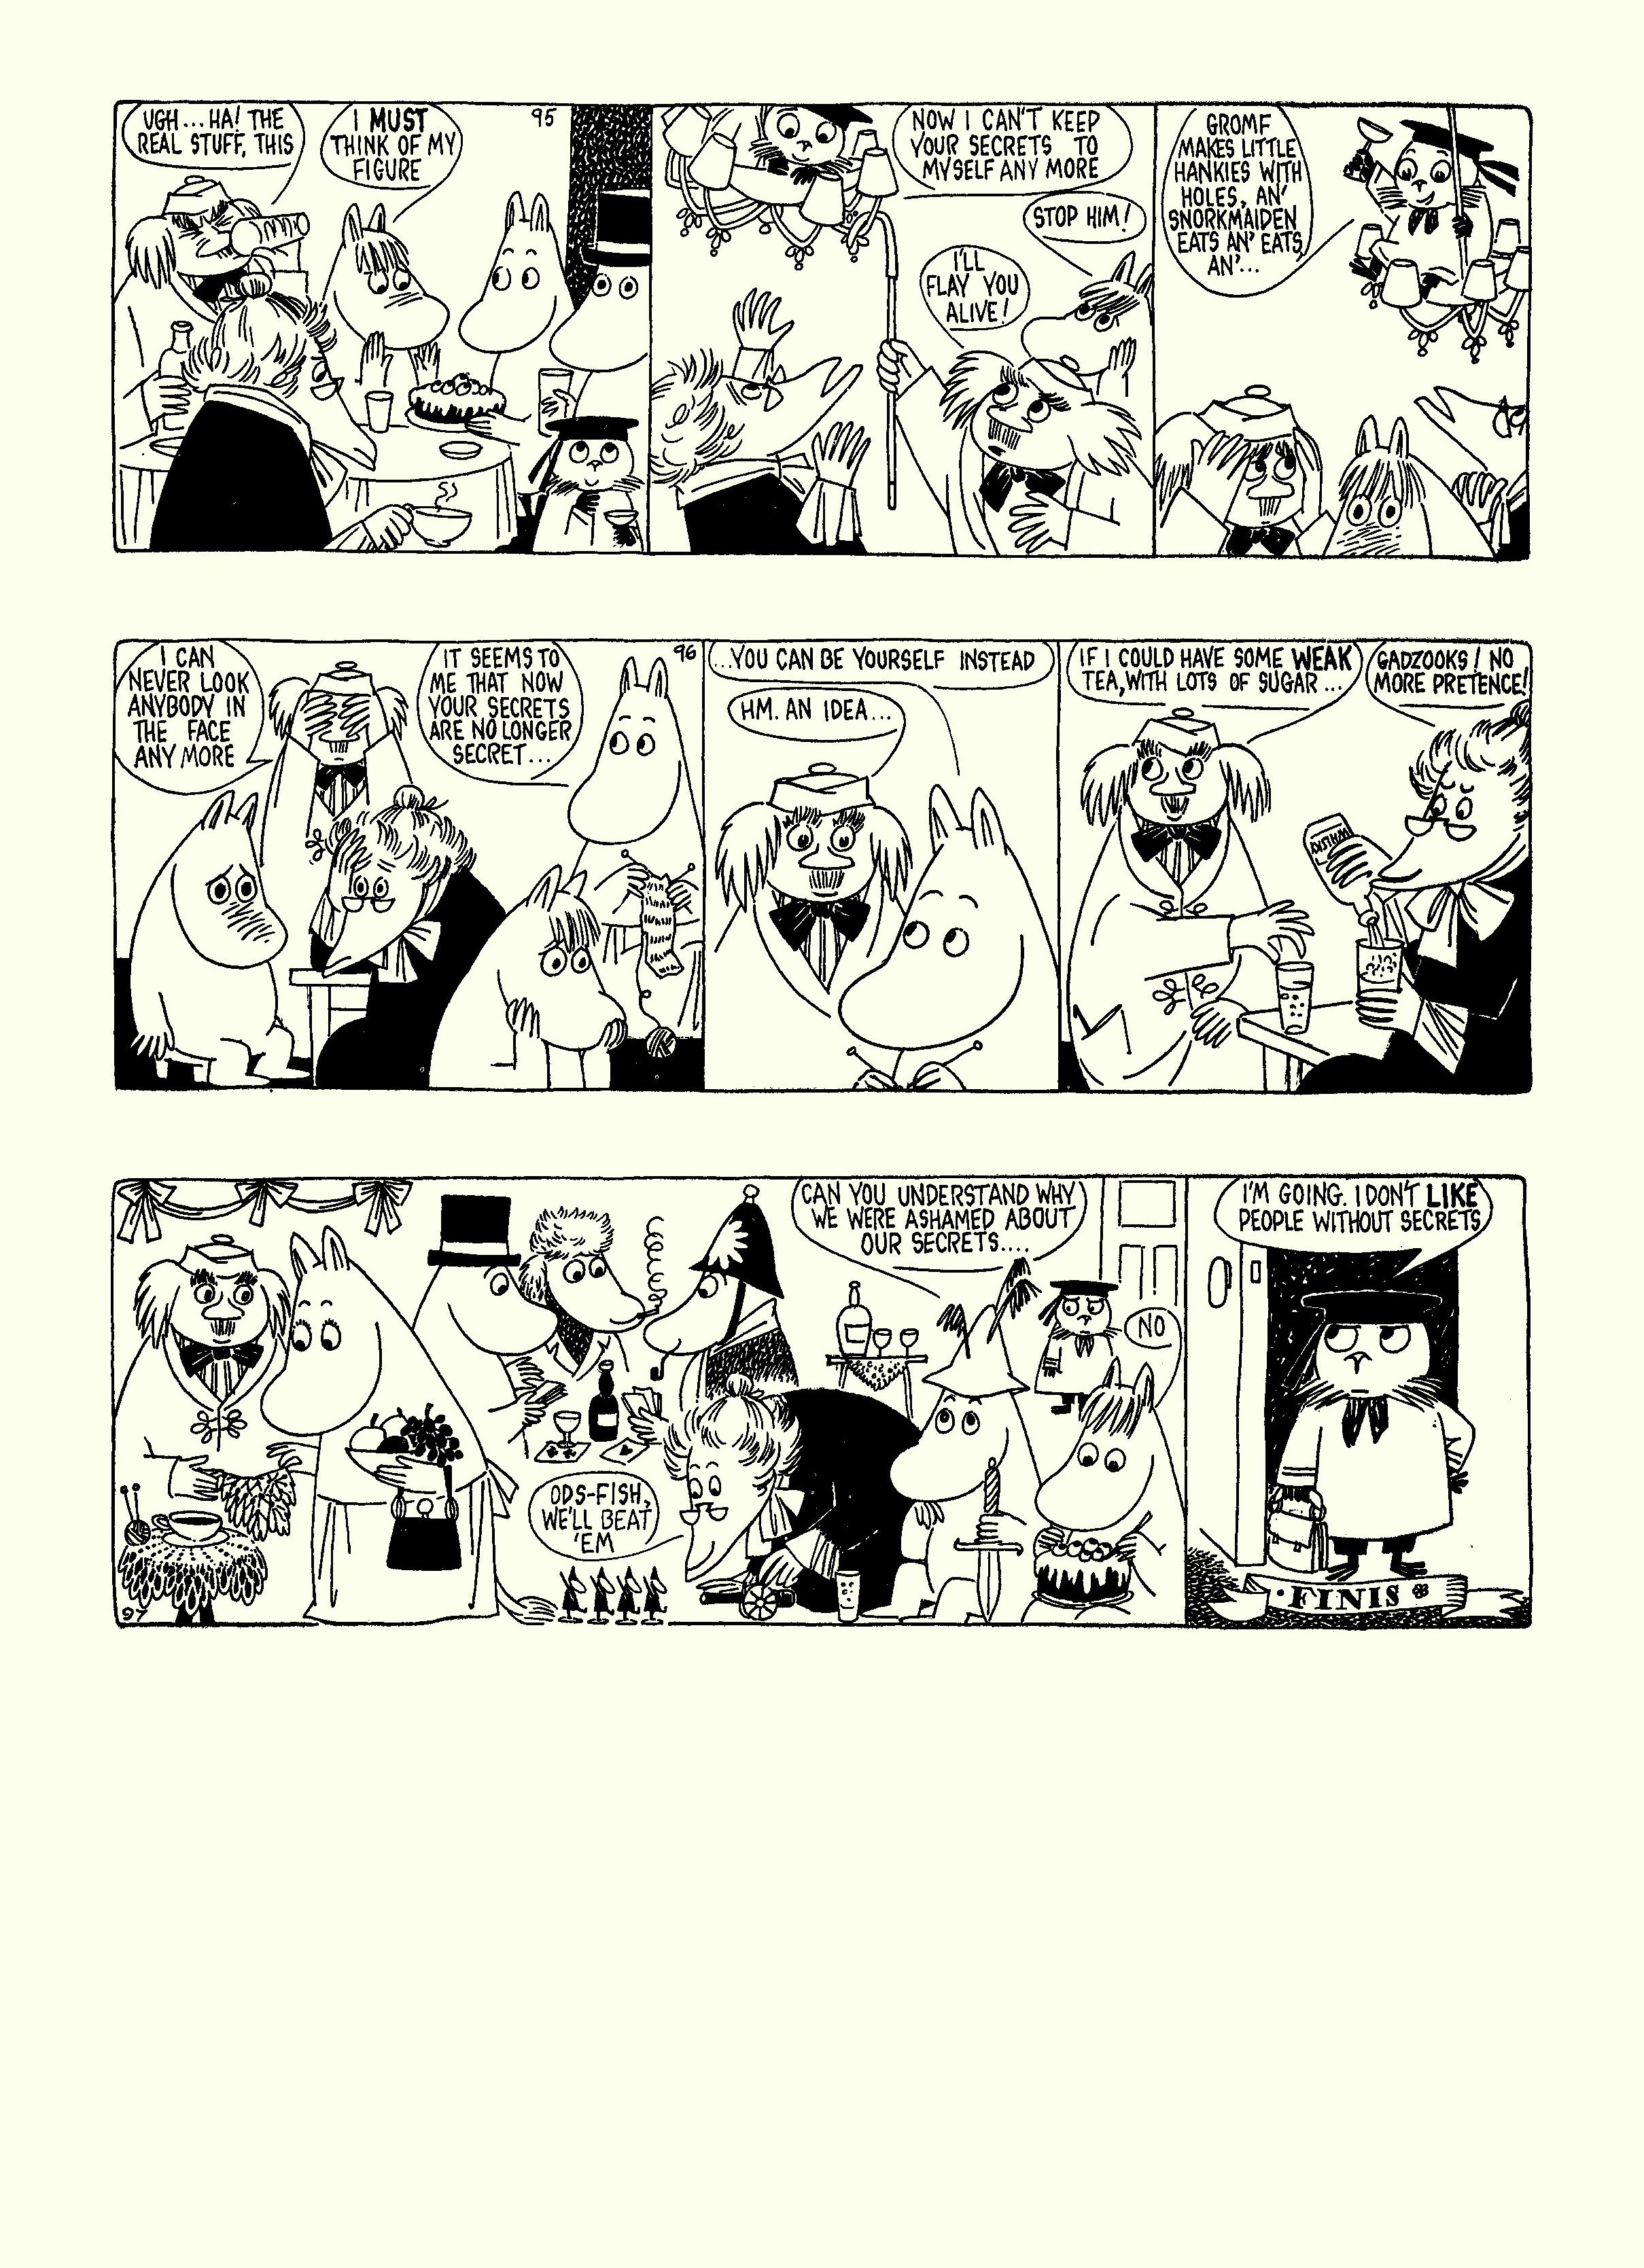 Read online Moomin: The Complete Tove Jansson Comic Strip comic -  Issue # TPB 5 - 30